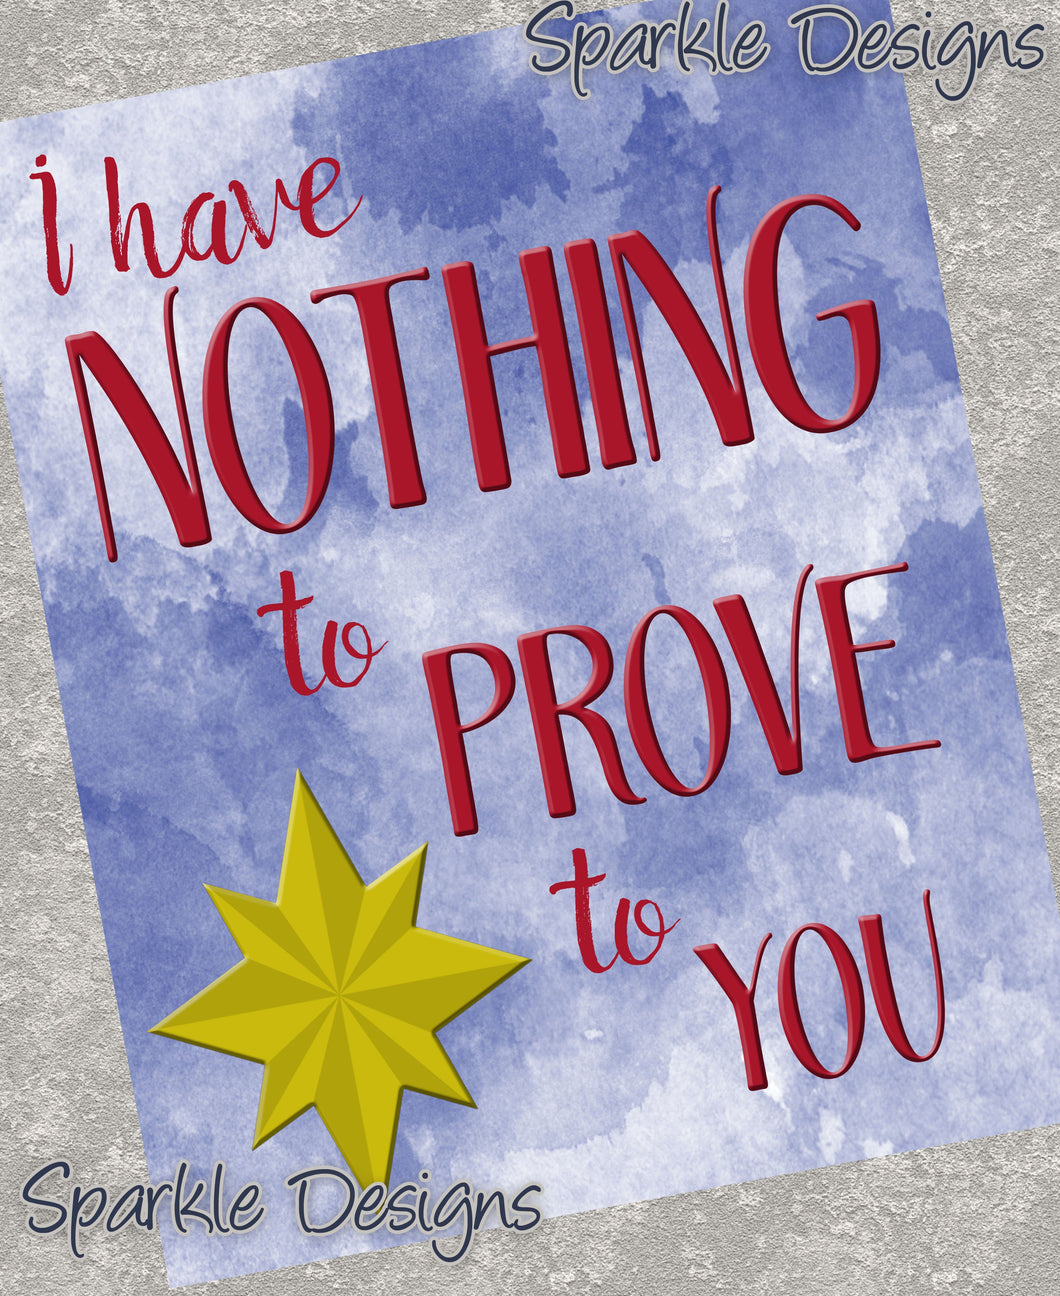 I have nothing to prove to you -263 wood Print